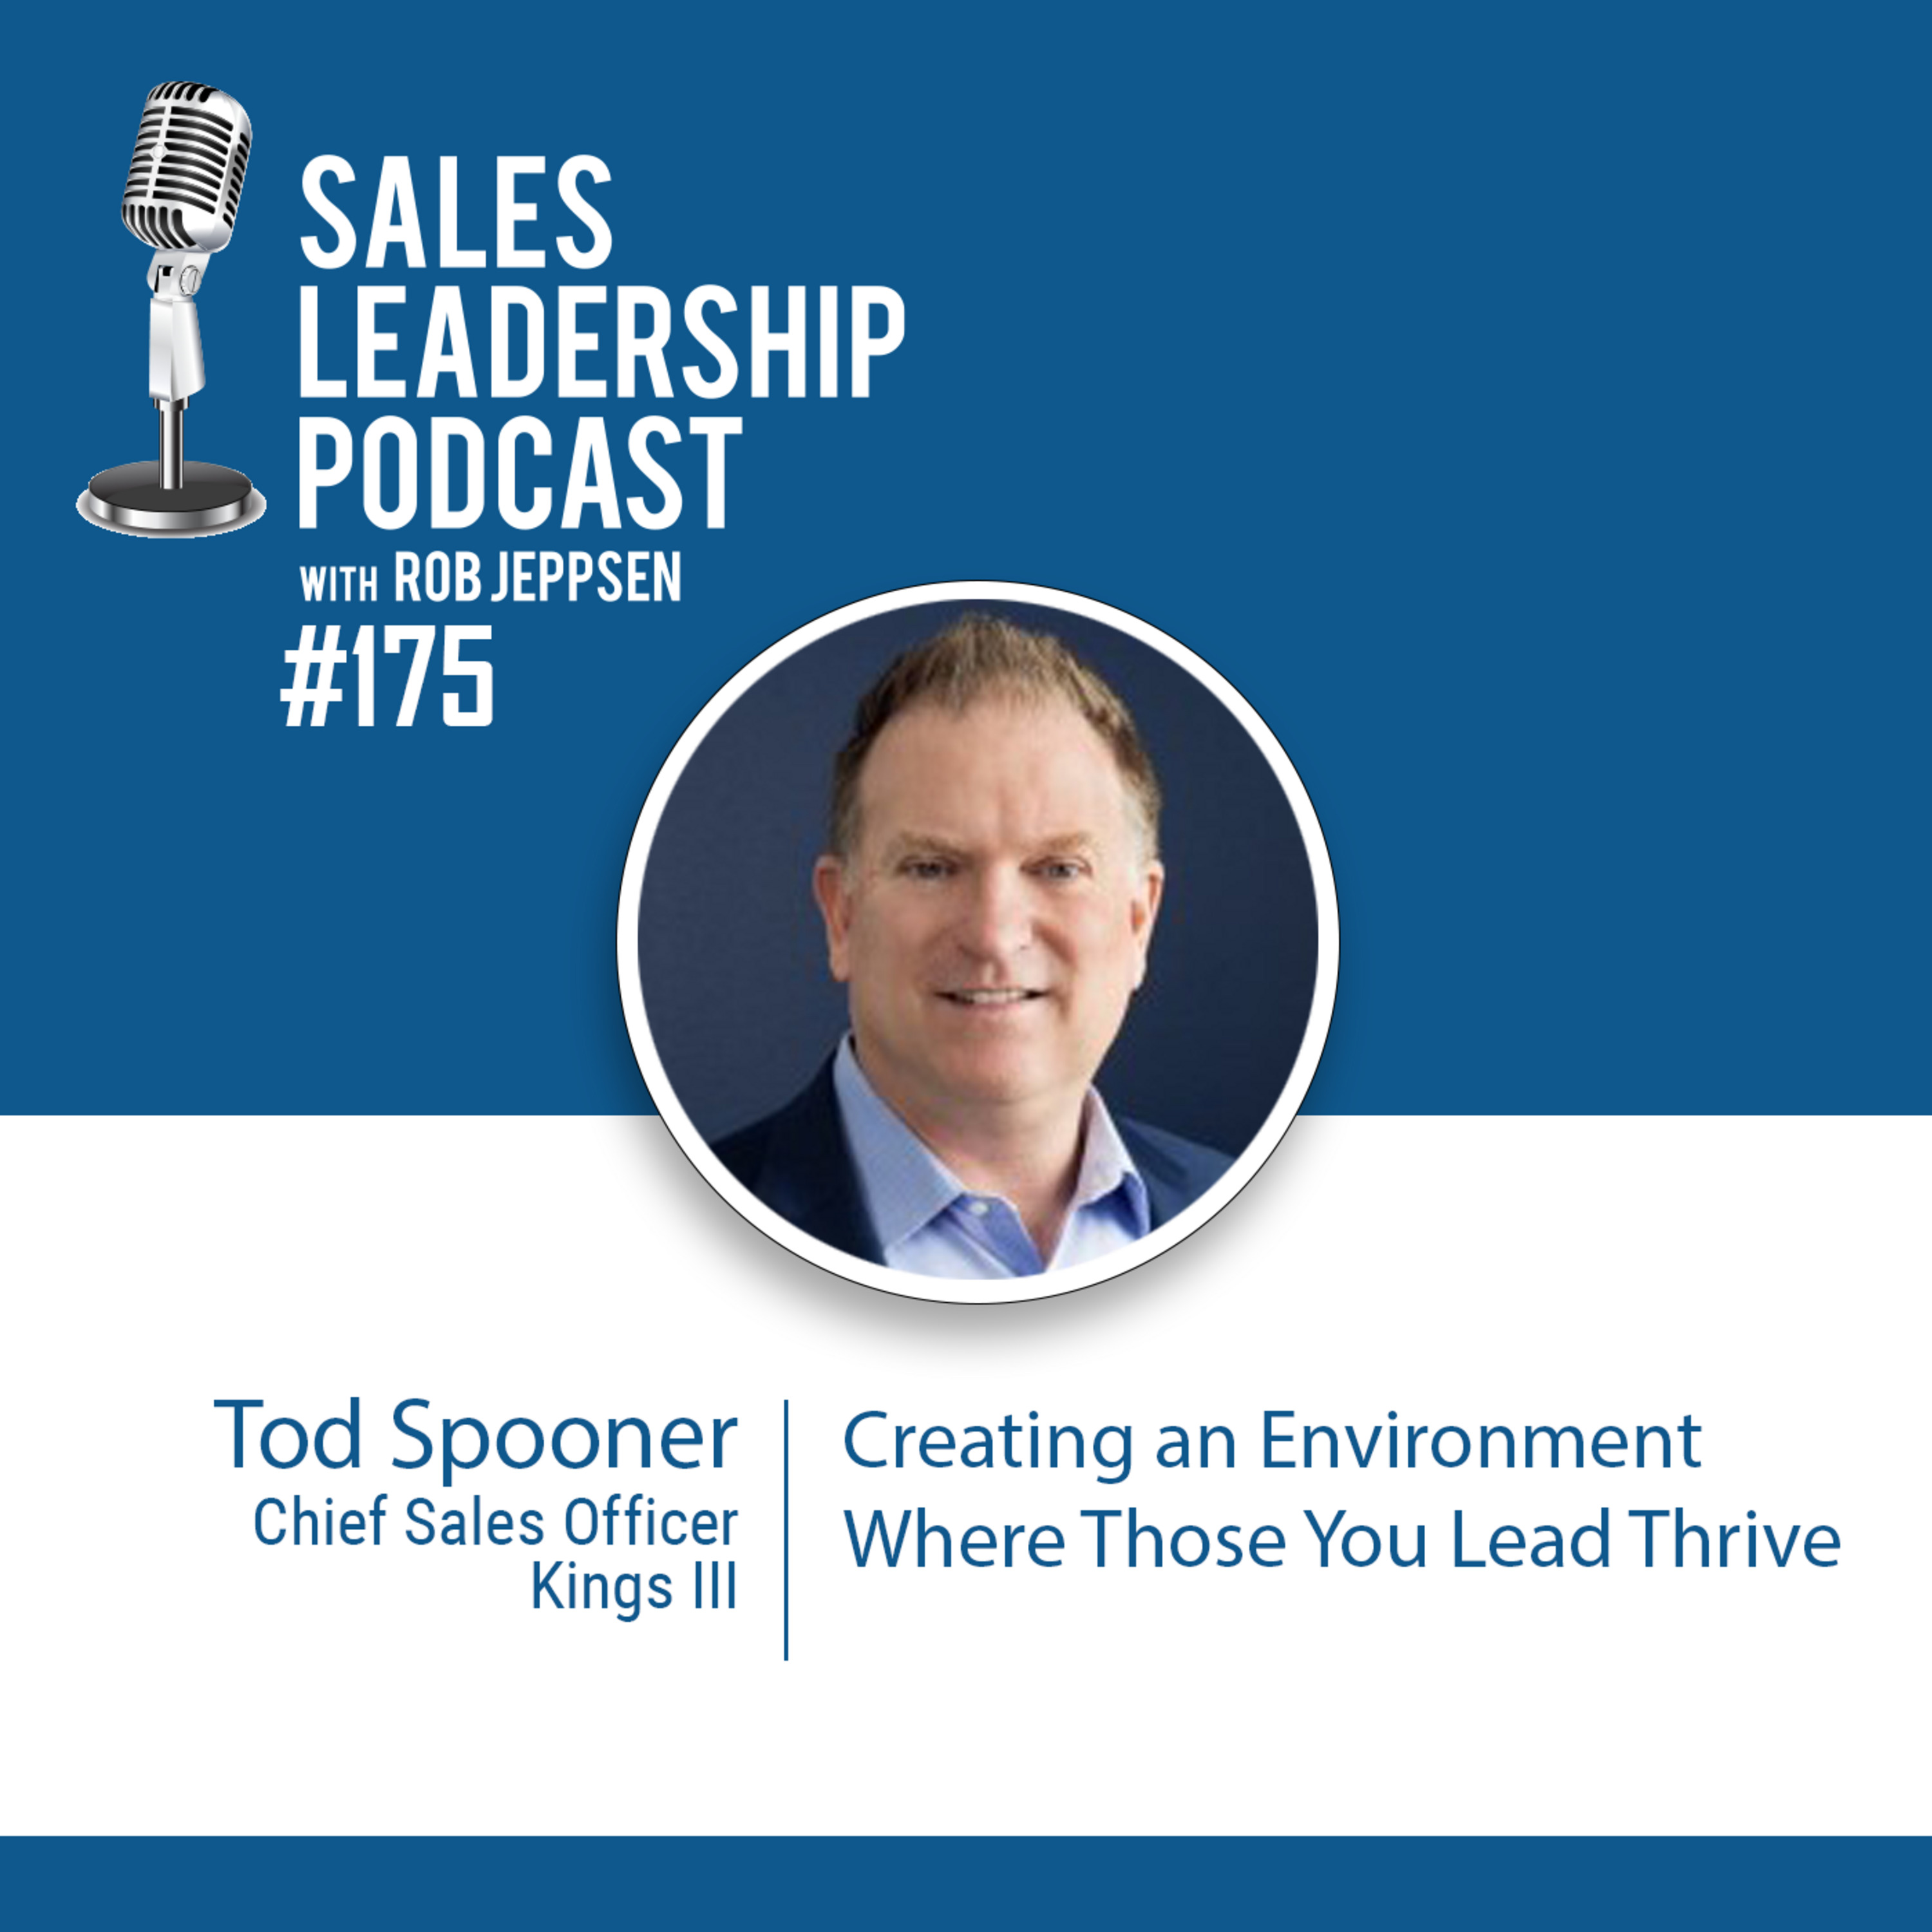 Episode 176: #175: Tod Spooner of Kings III — Creating an Environment Where Those You Lead Thrive